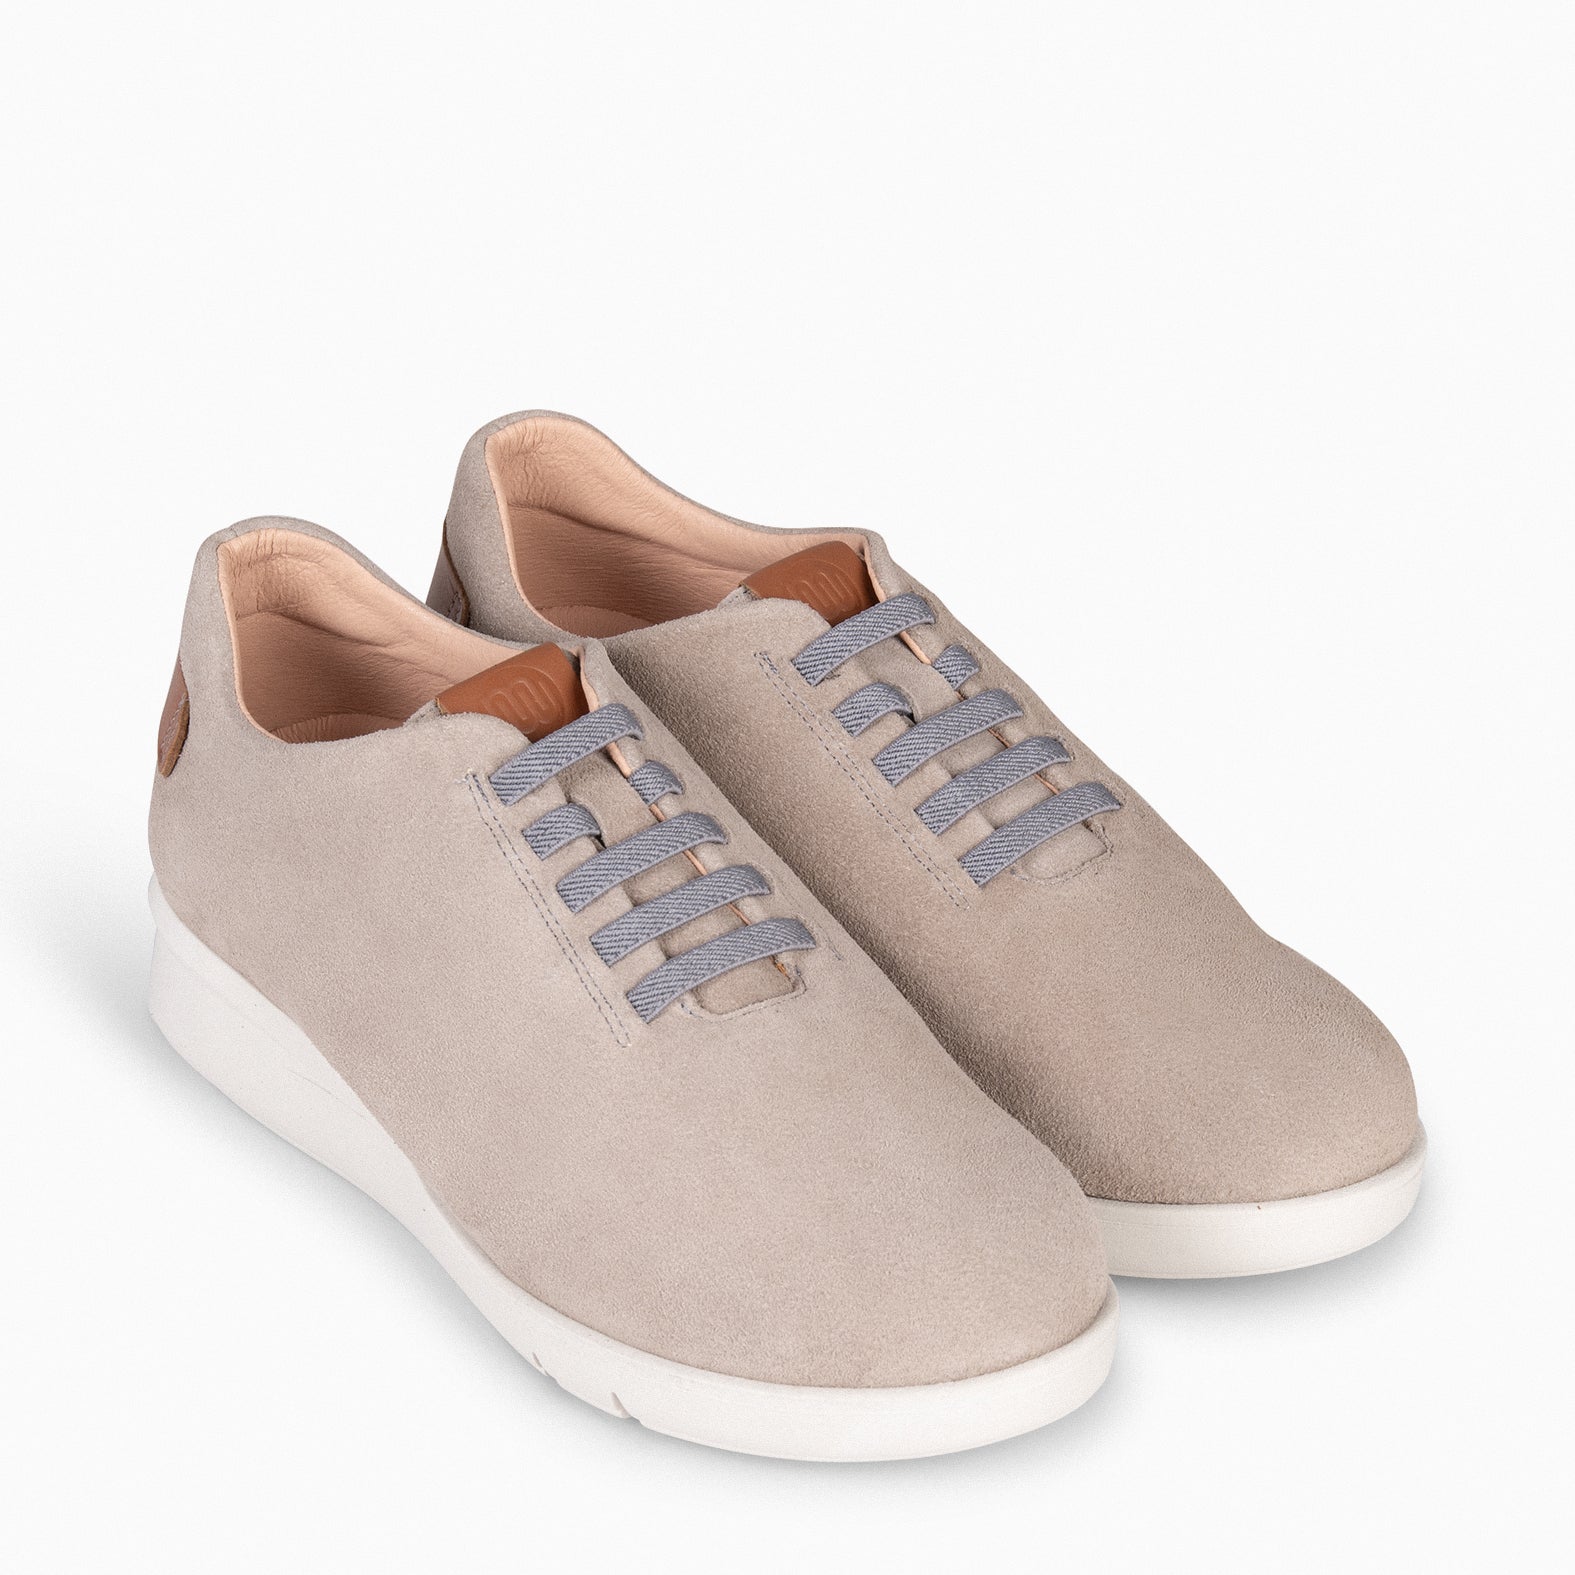 FLY – Baskets compensées TAUPE